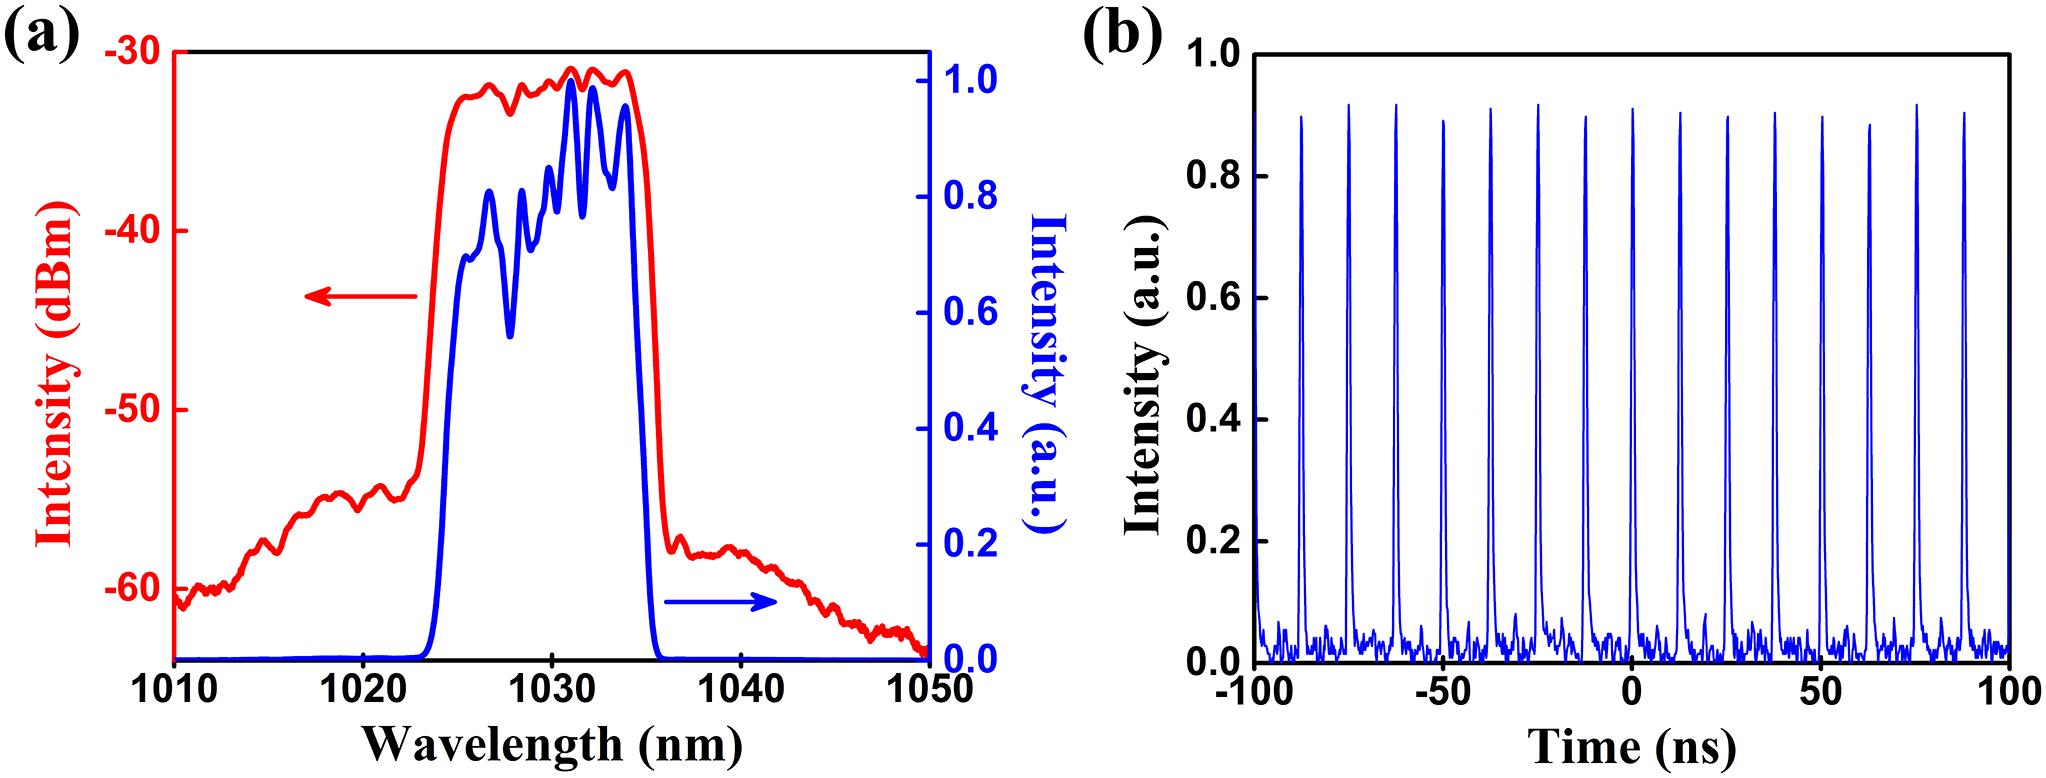 The laser properties of the seed pulse: (a) output spectrum; (b) pulse train.